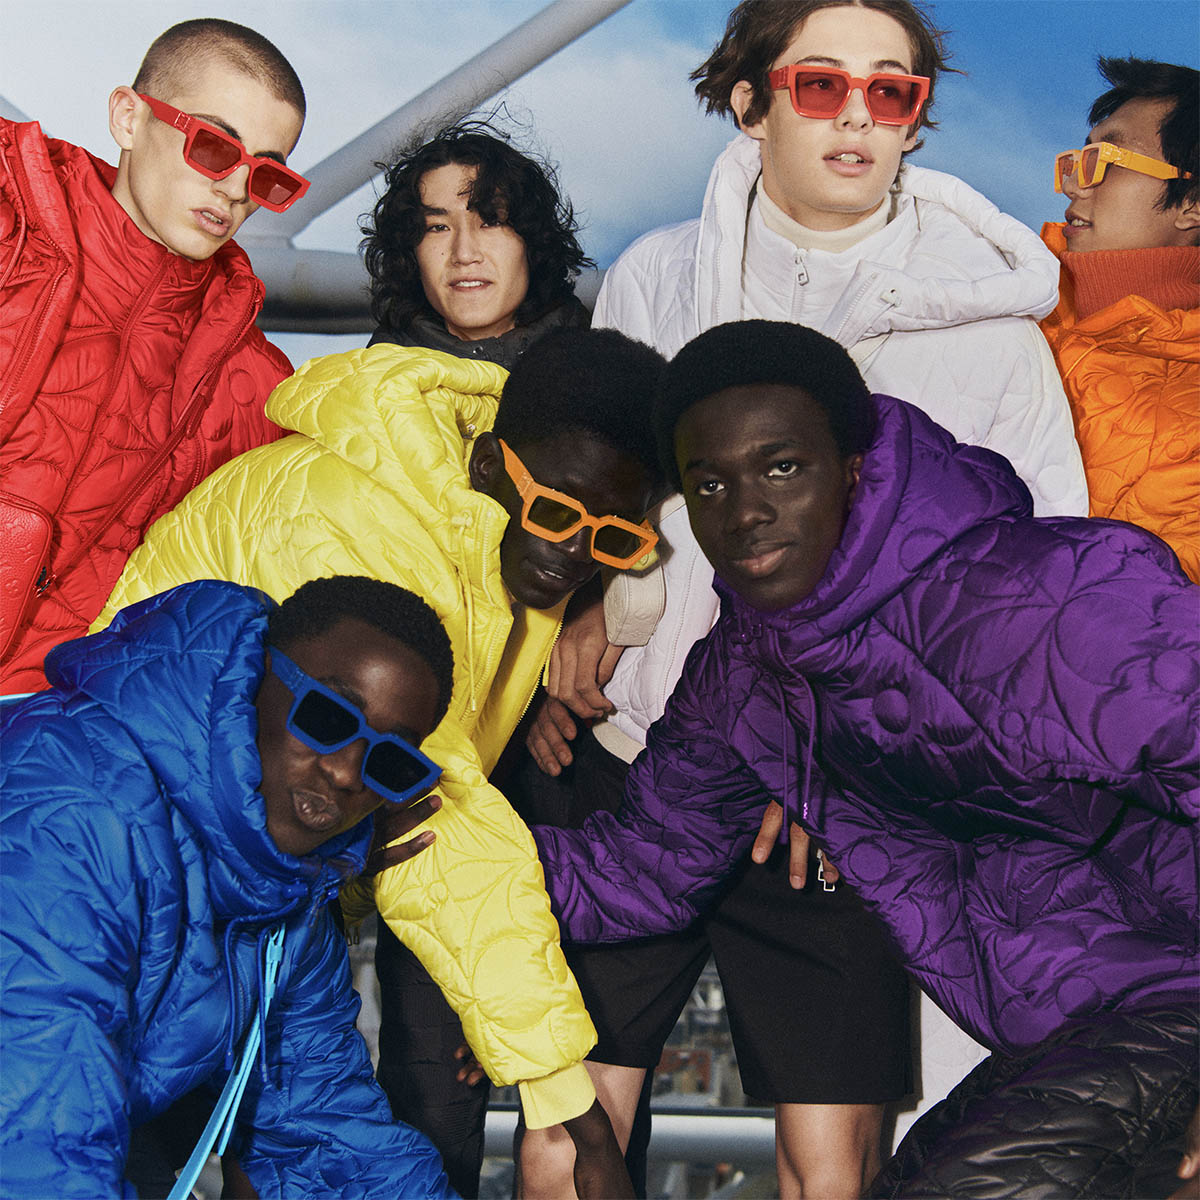 Louis Vuitton Reveals Its New A Piece of the Rainbow Collection